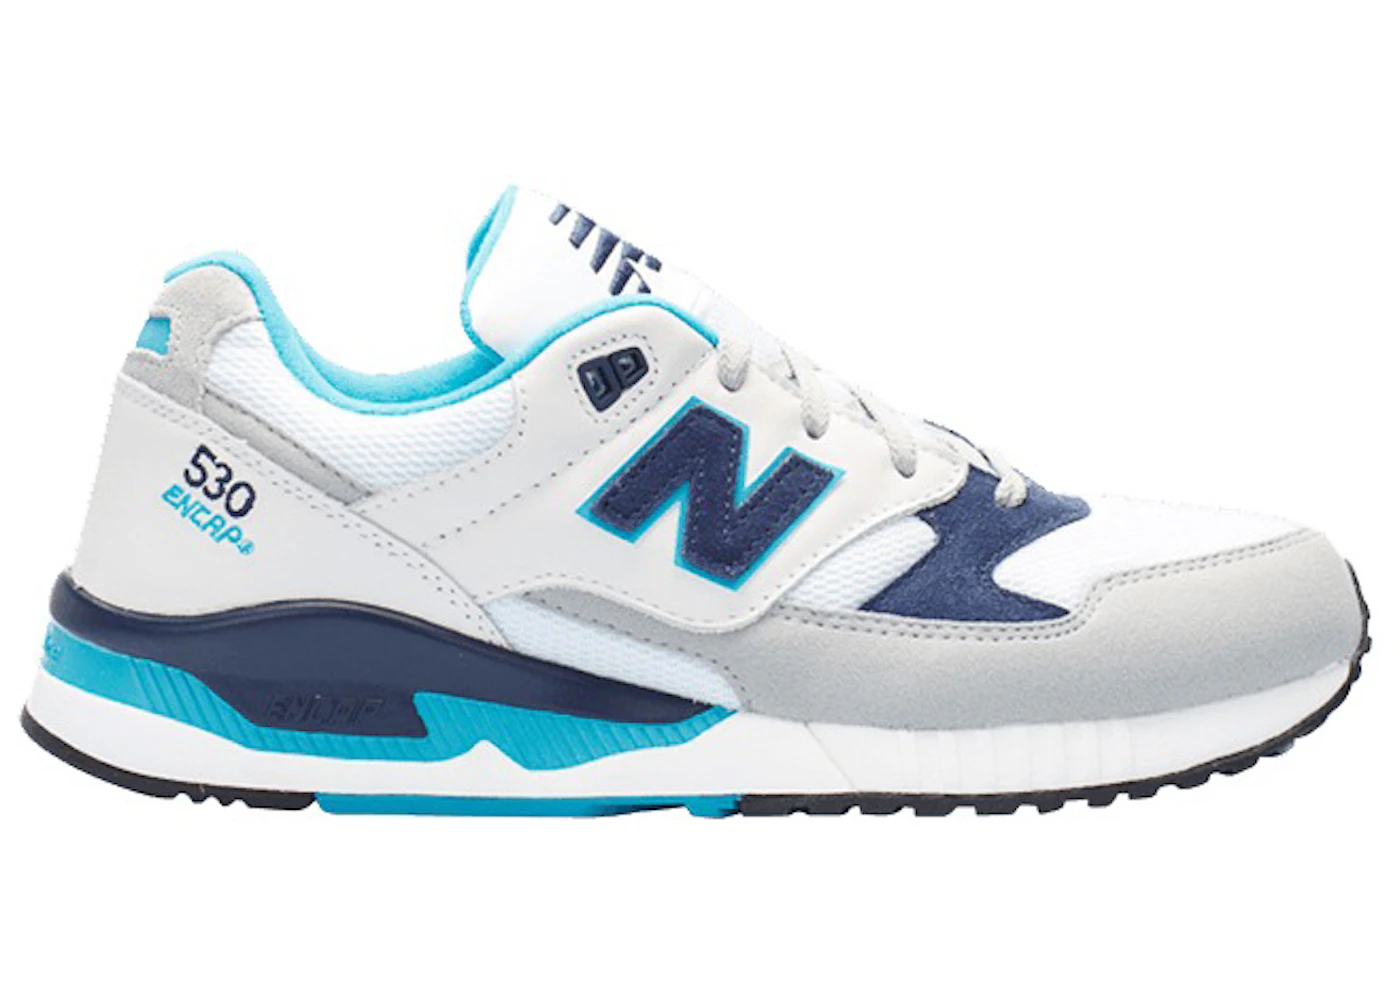 New Balance 530 White Navy Teal Men's Trainers - M530AAC - GB